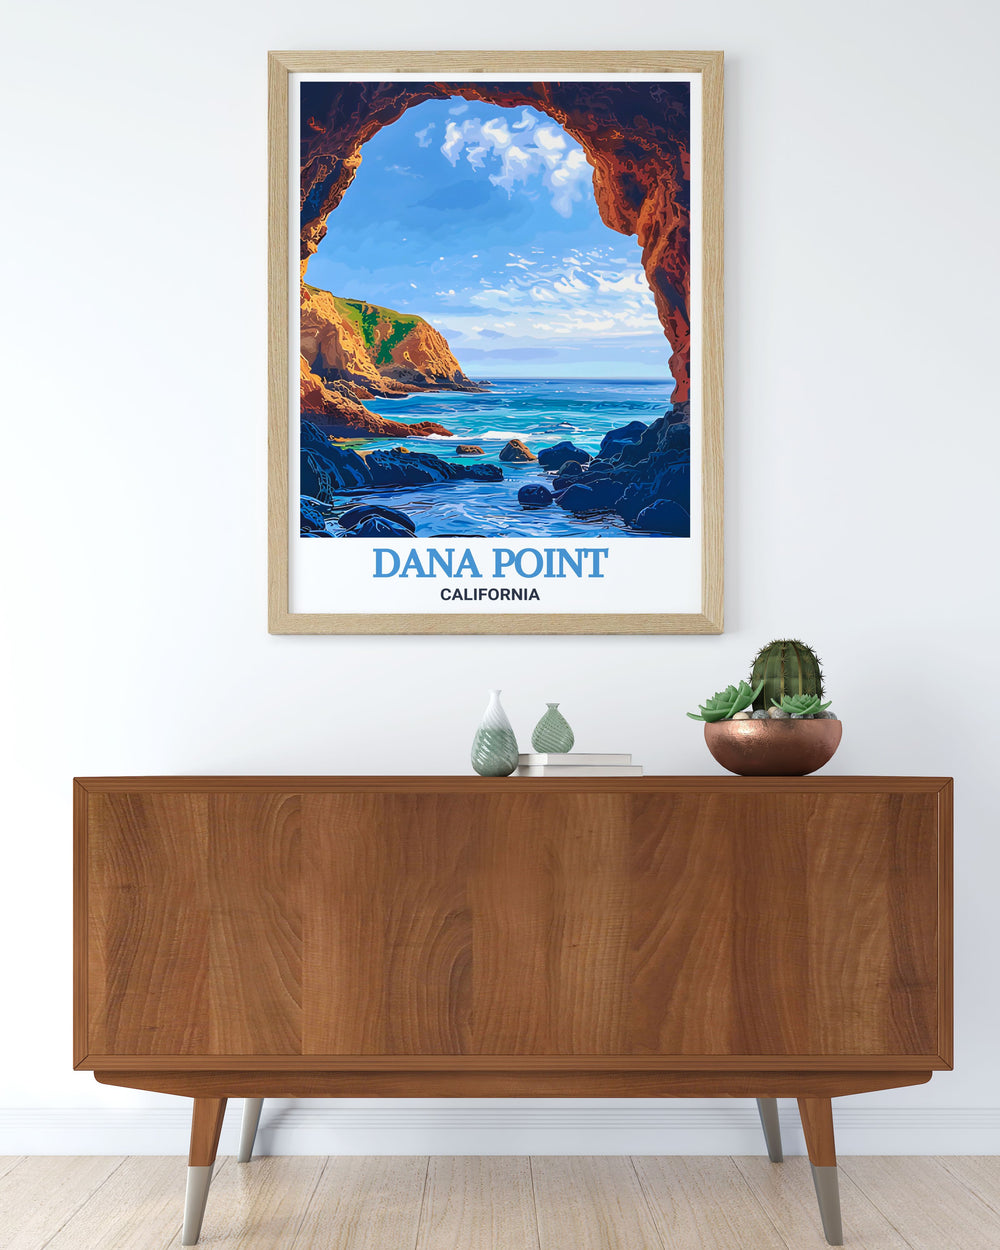 Enhance your home decor with this beautiful Dana Point Caves print. Featuring the intricate details of the caves, this California artwork is ideal for anyone who loves the serene and captivating landscapes of Dana Point.